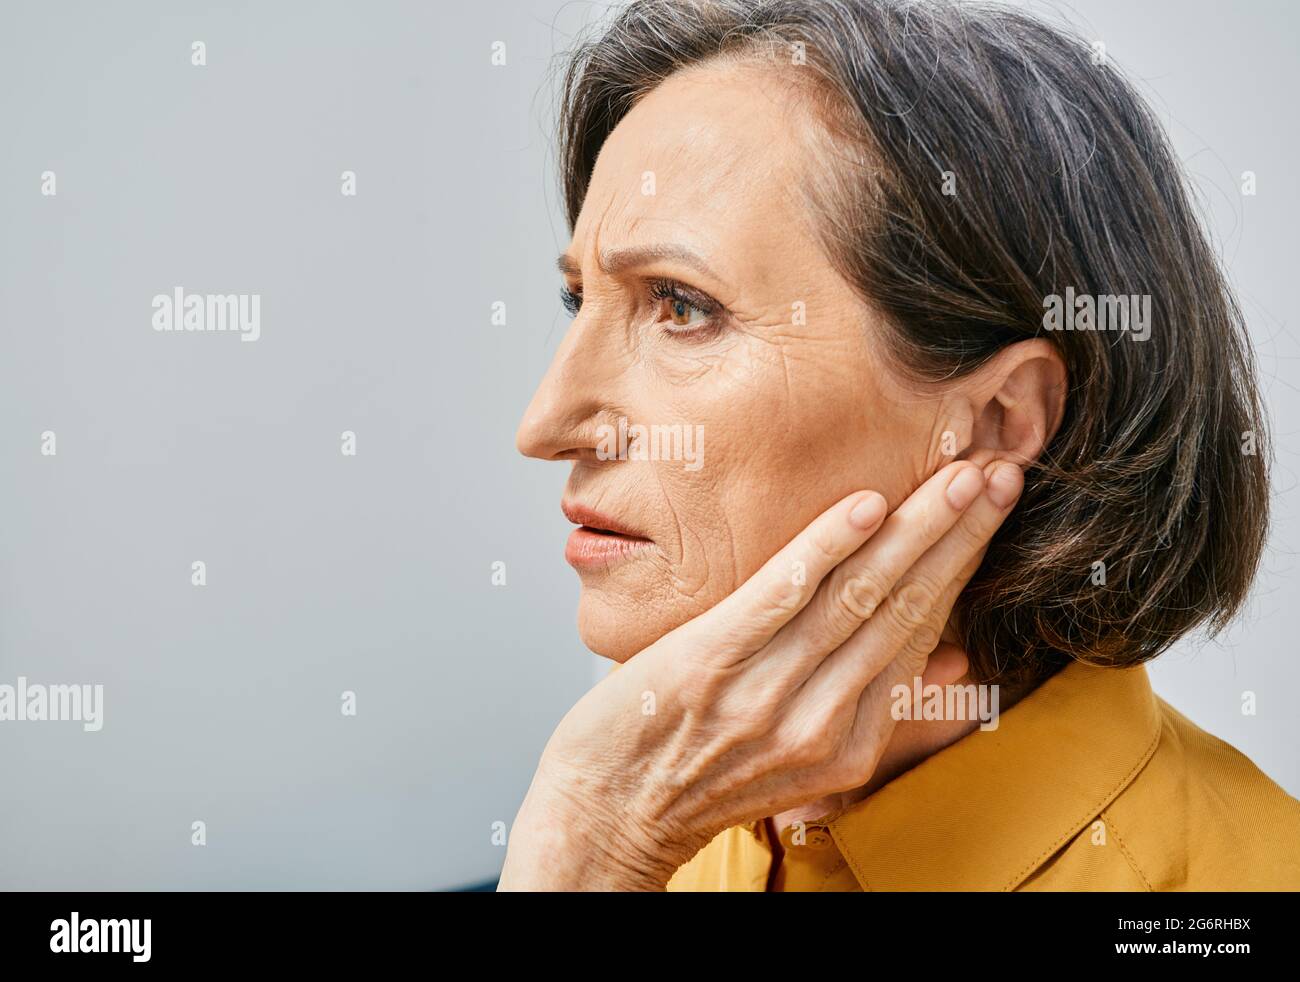 Hearing loss. Mature woman with hearing problems touching ear with hand. Side view, earache Stock Photo